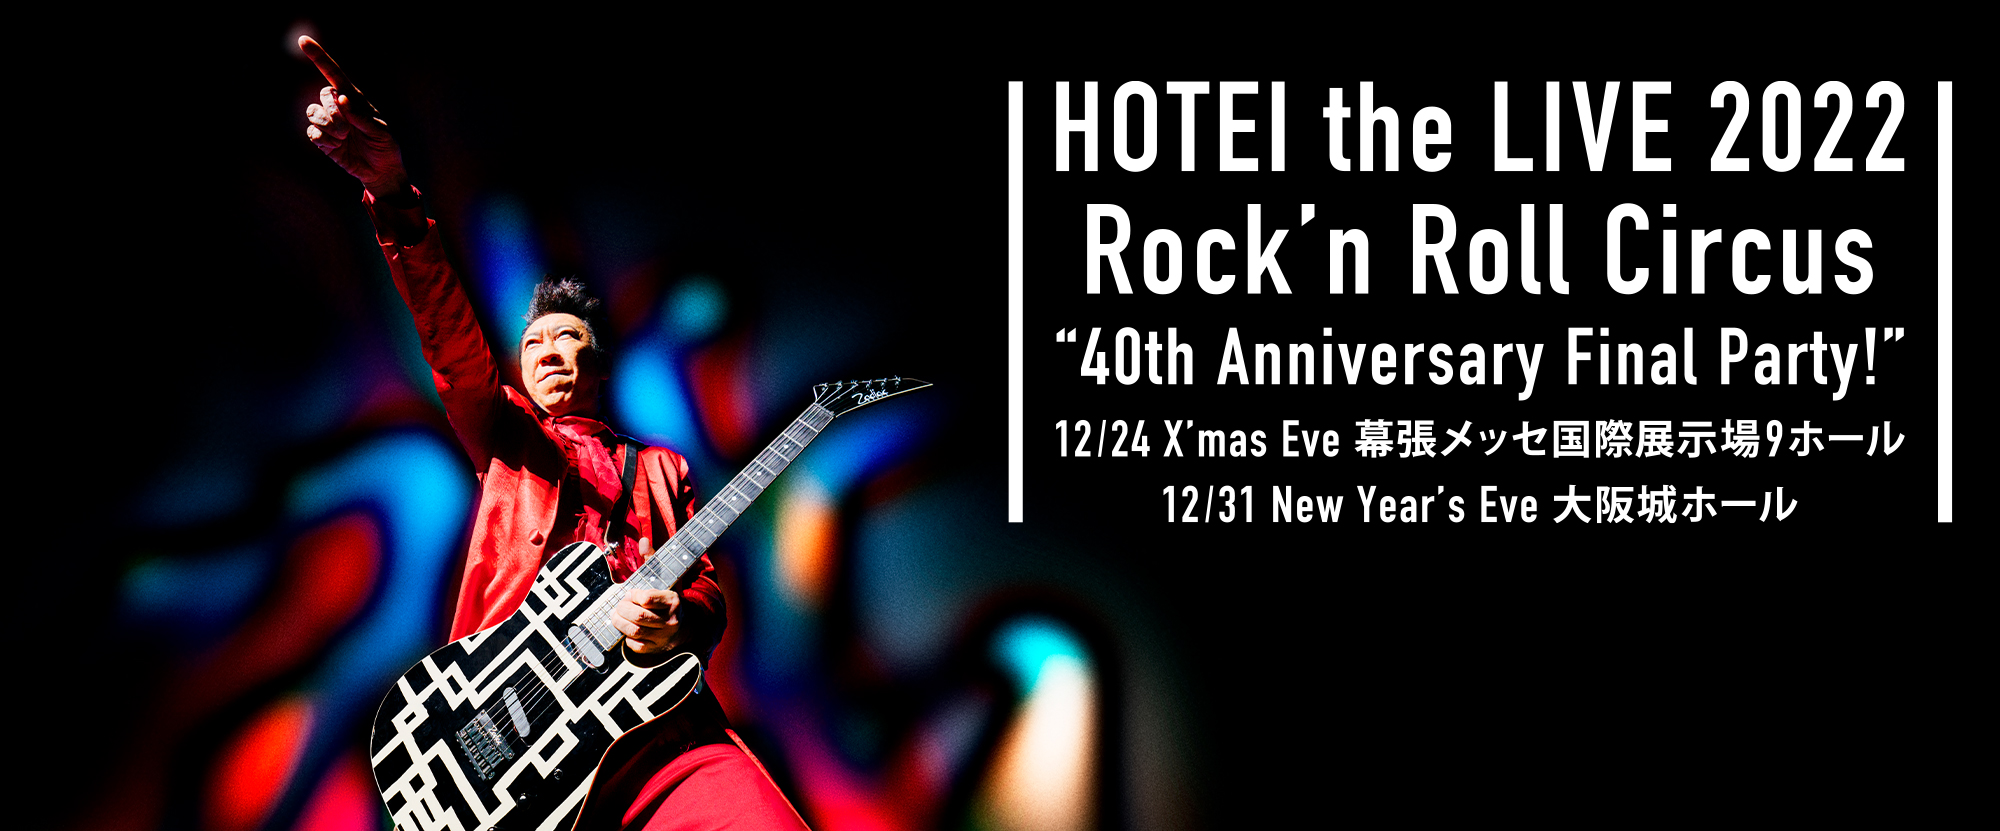 HOTEI the LIVE 2022 Rock'n Roll Circus “40th Anniversary Final Party”